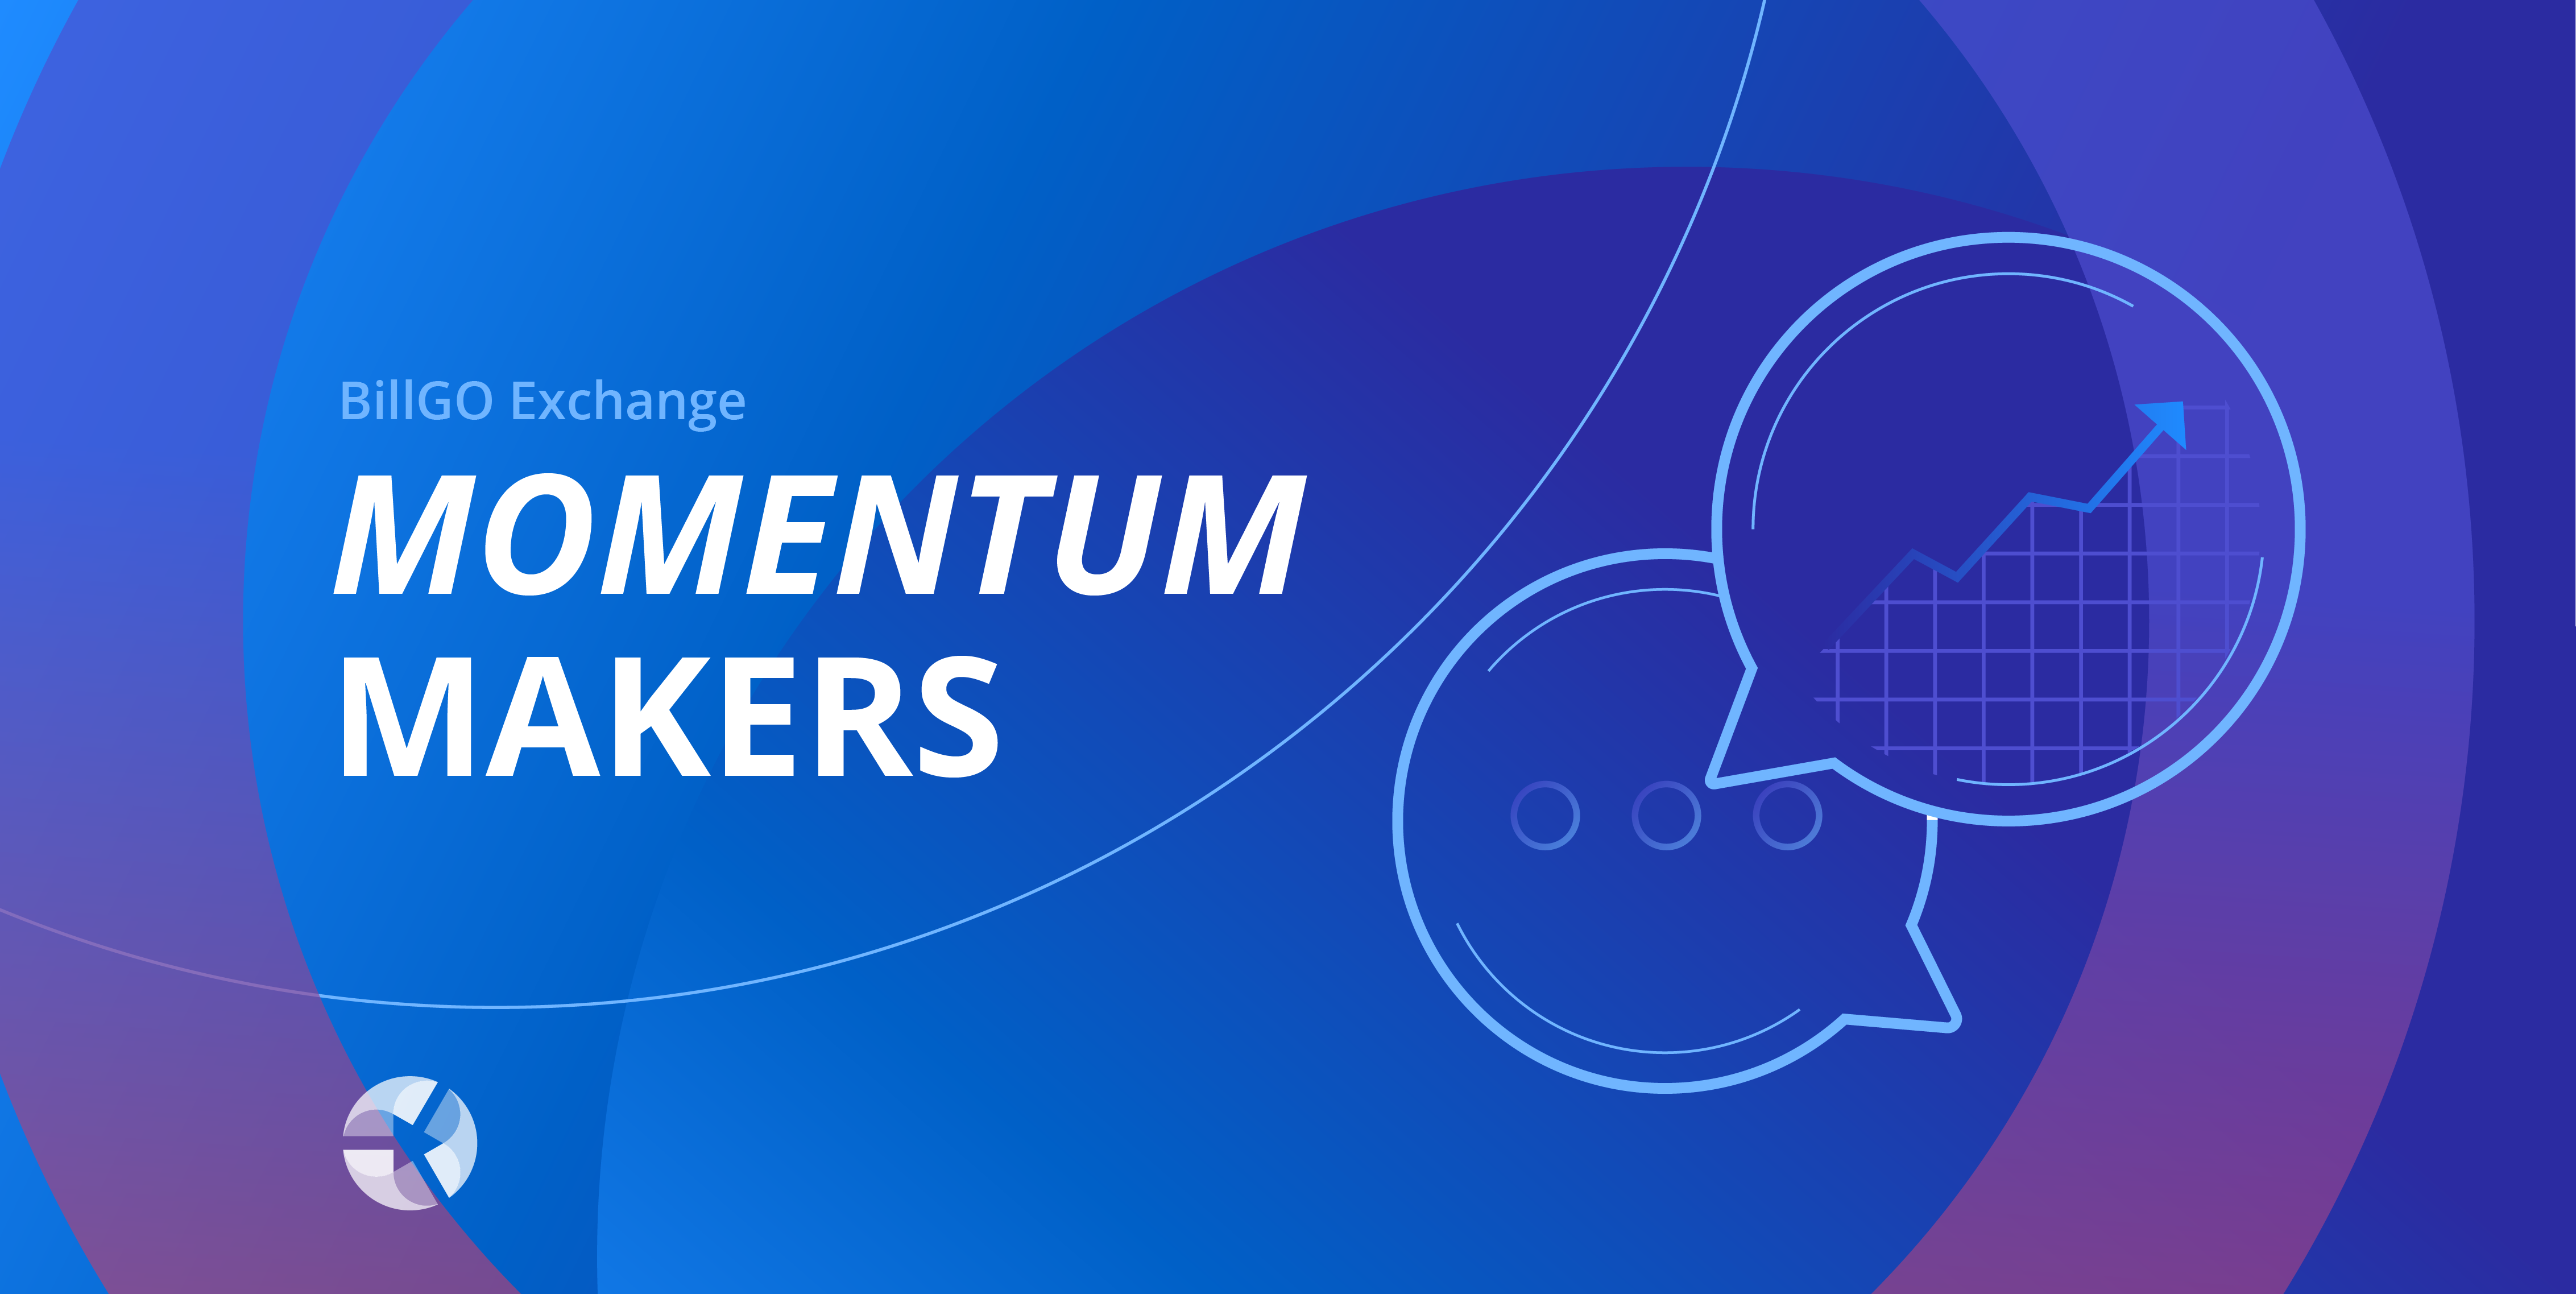 Momentum Makers: Driving Greater Workflow and Cashflow Efficiencies